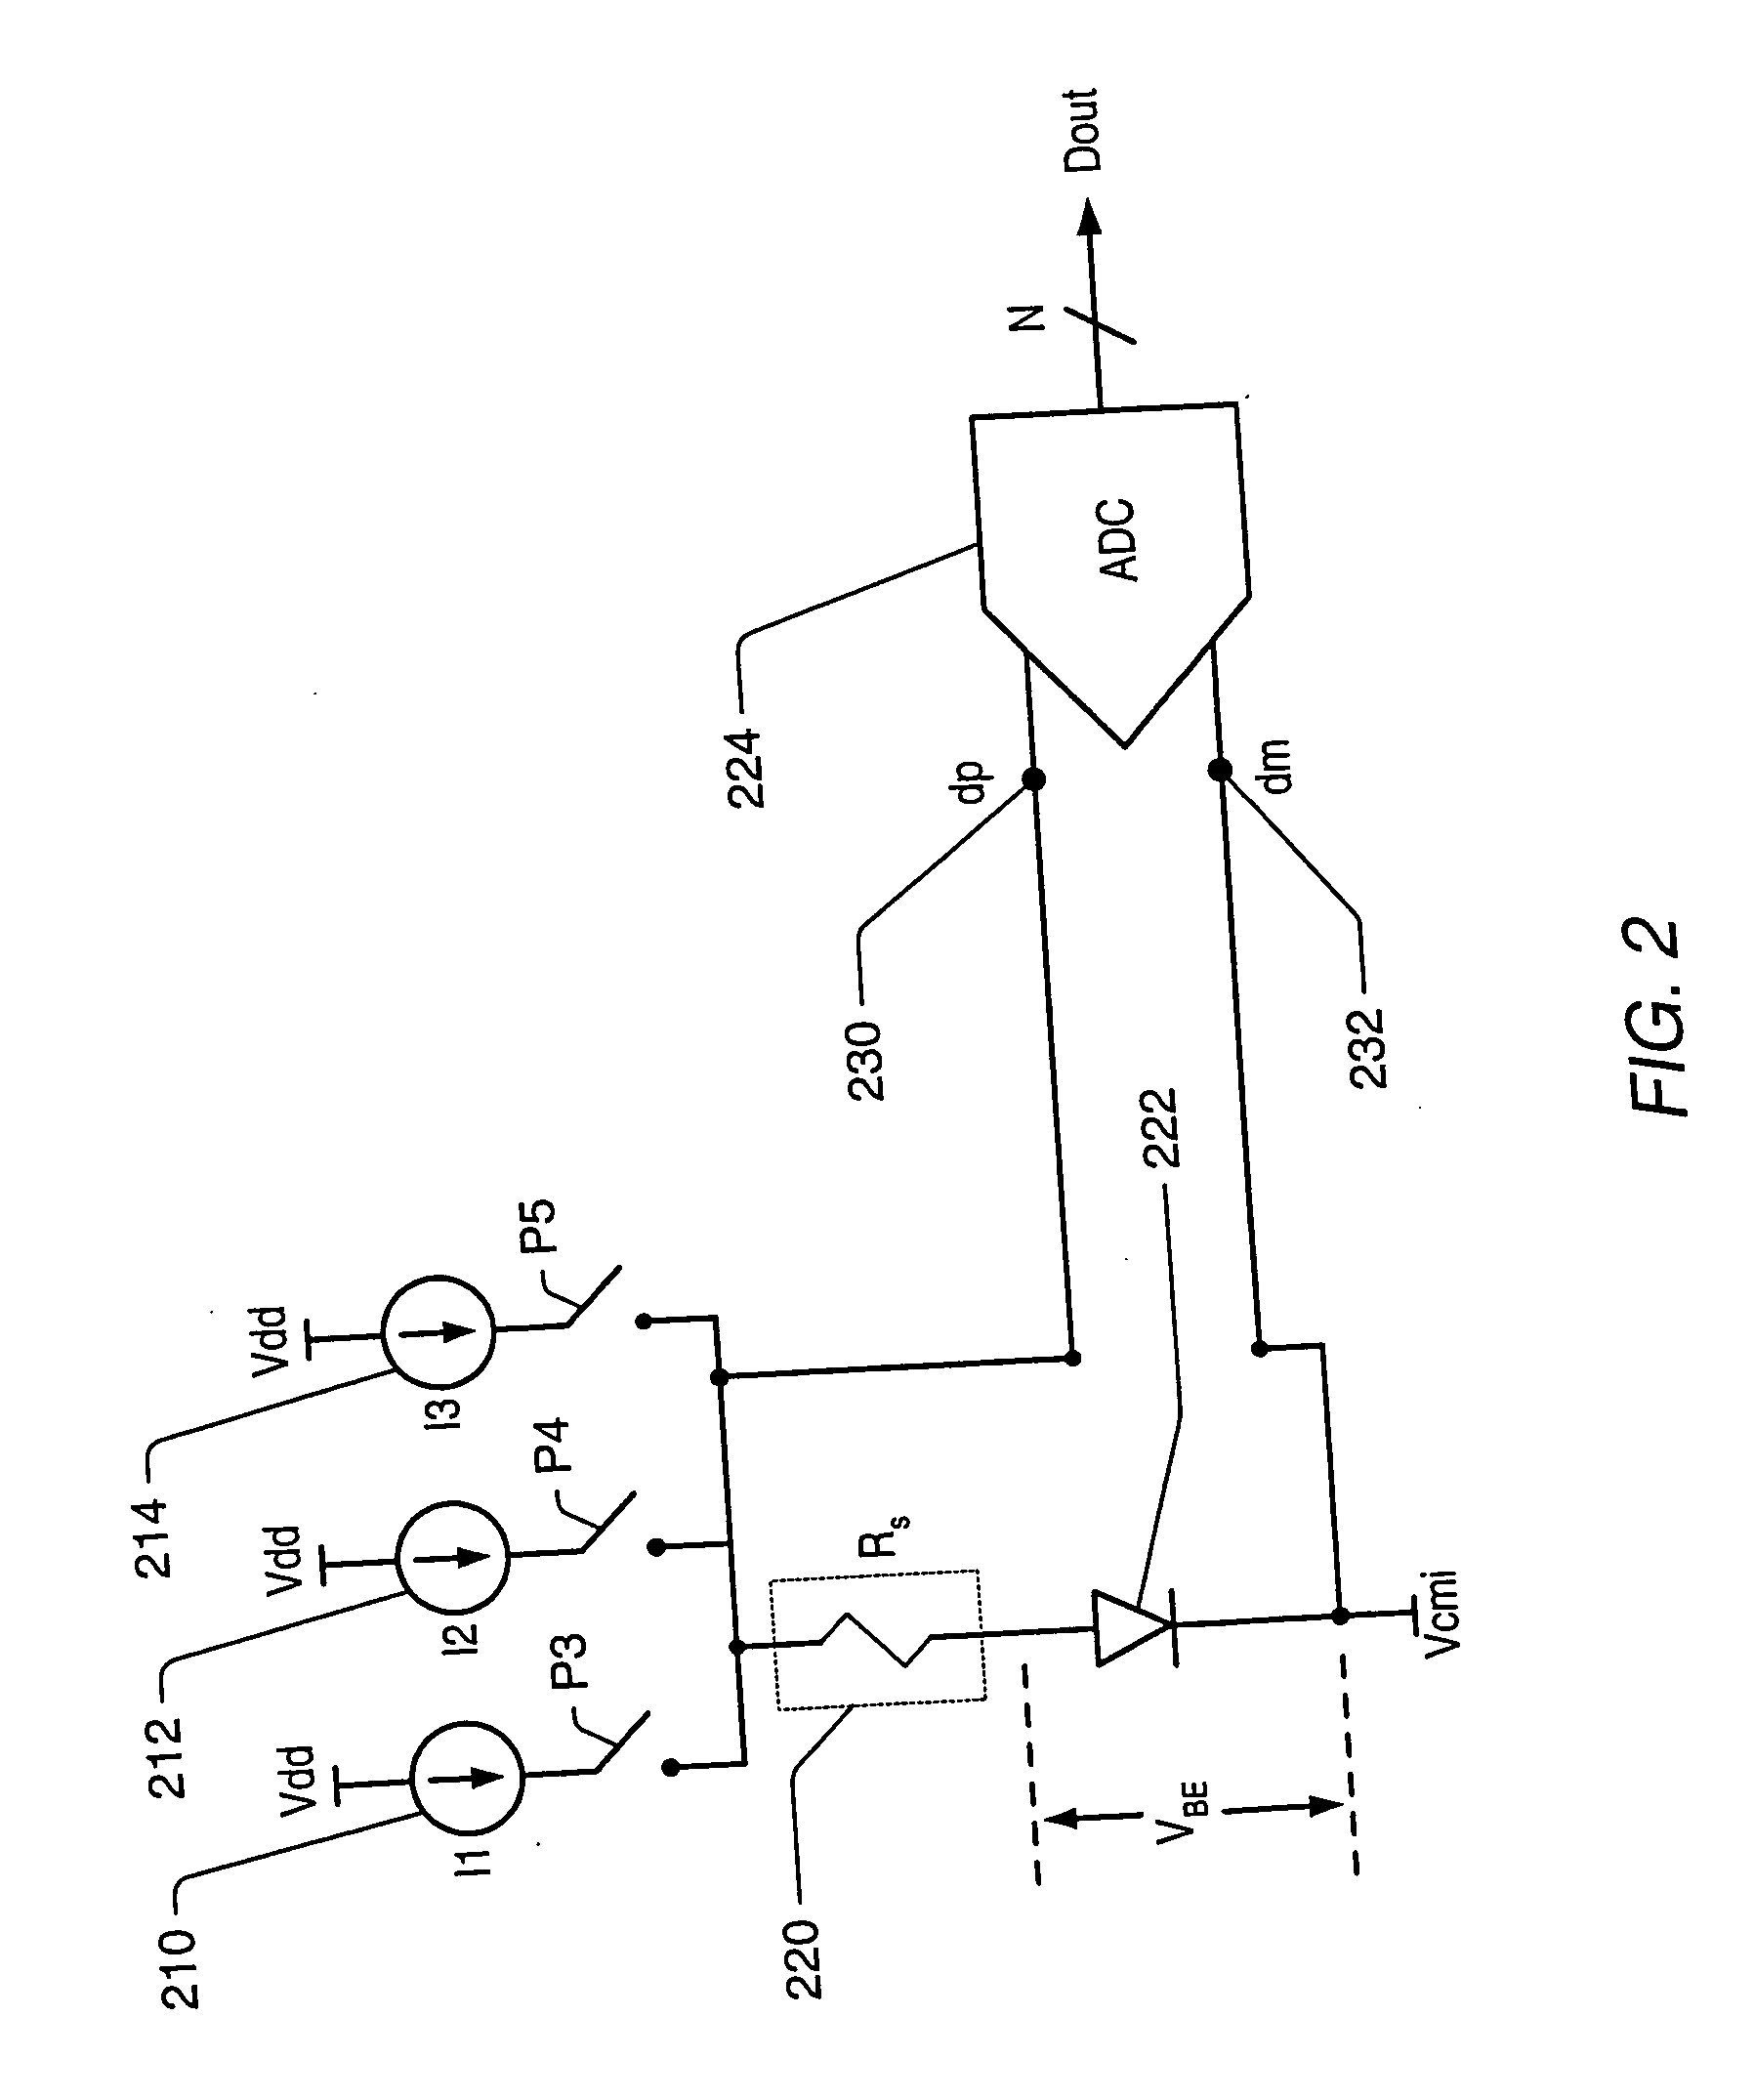 Integrated resistance cancellation in temperature measurement systems